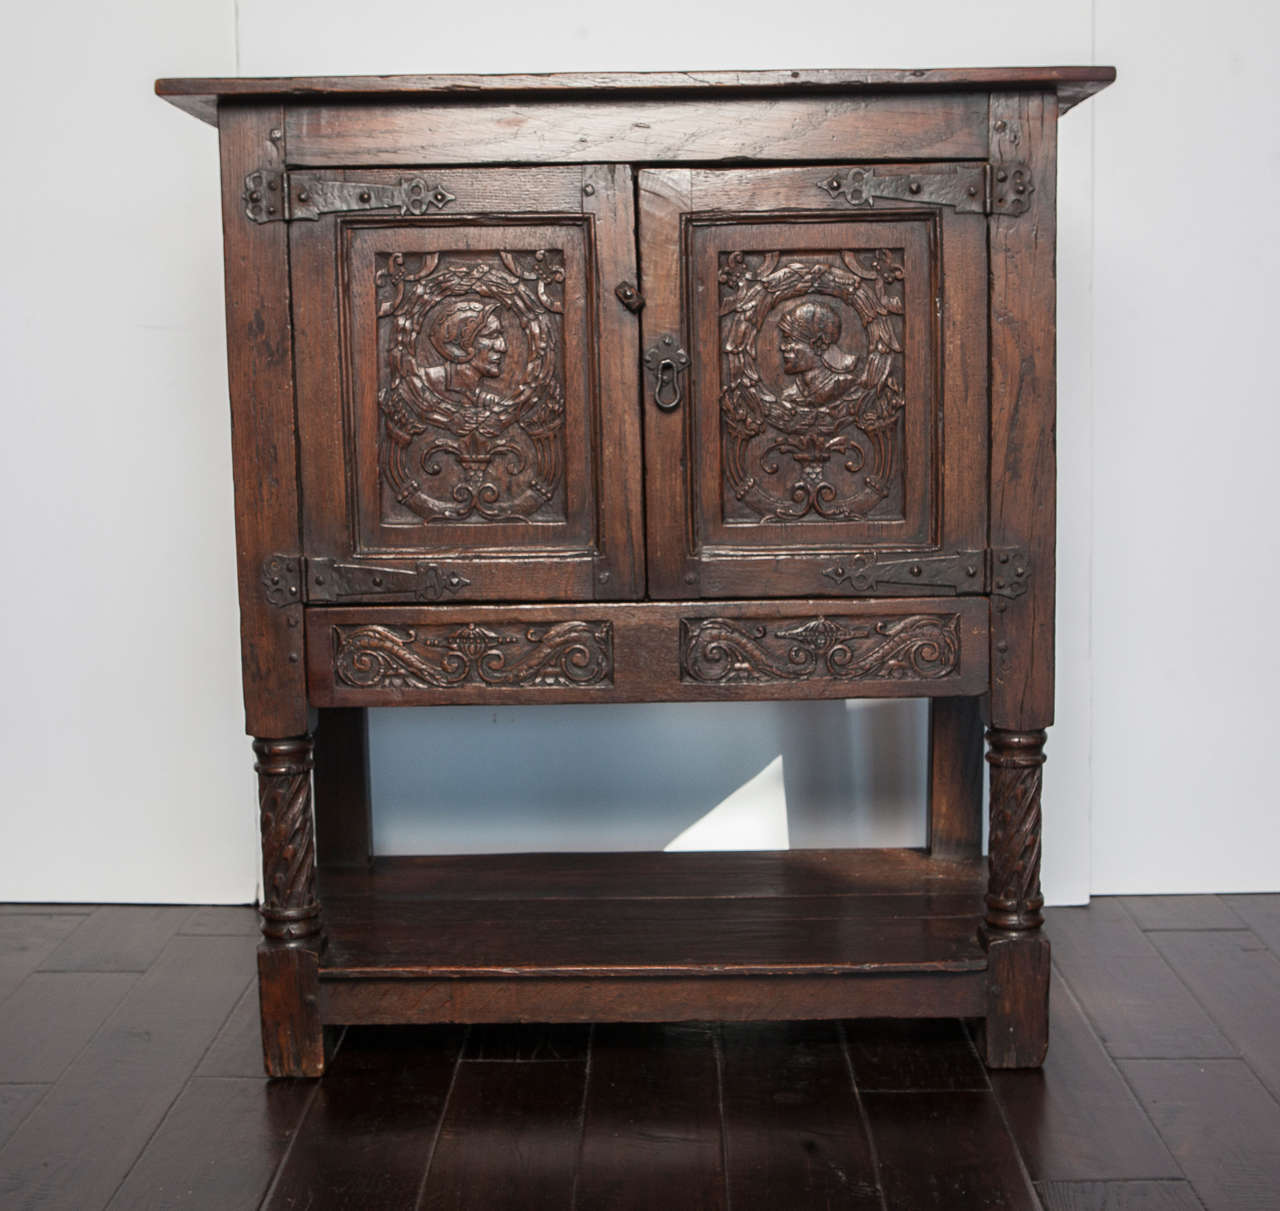 Carved oak cabinet with one interior shelf and one lower shelf.